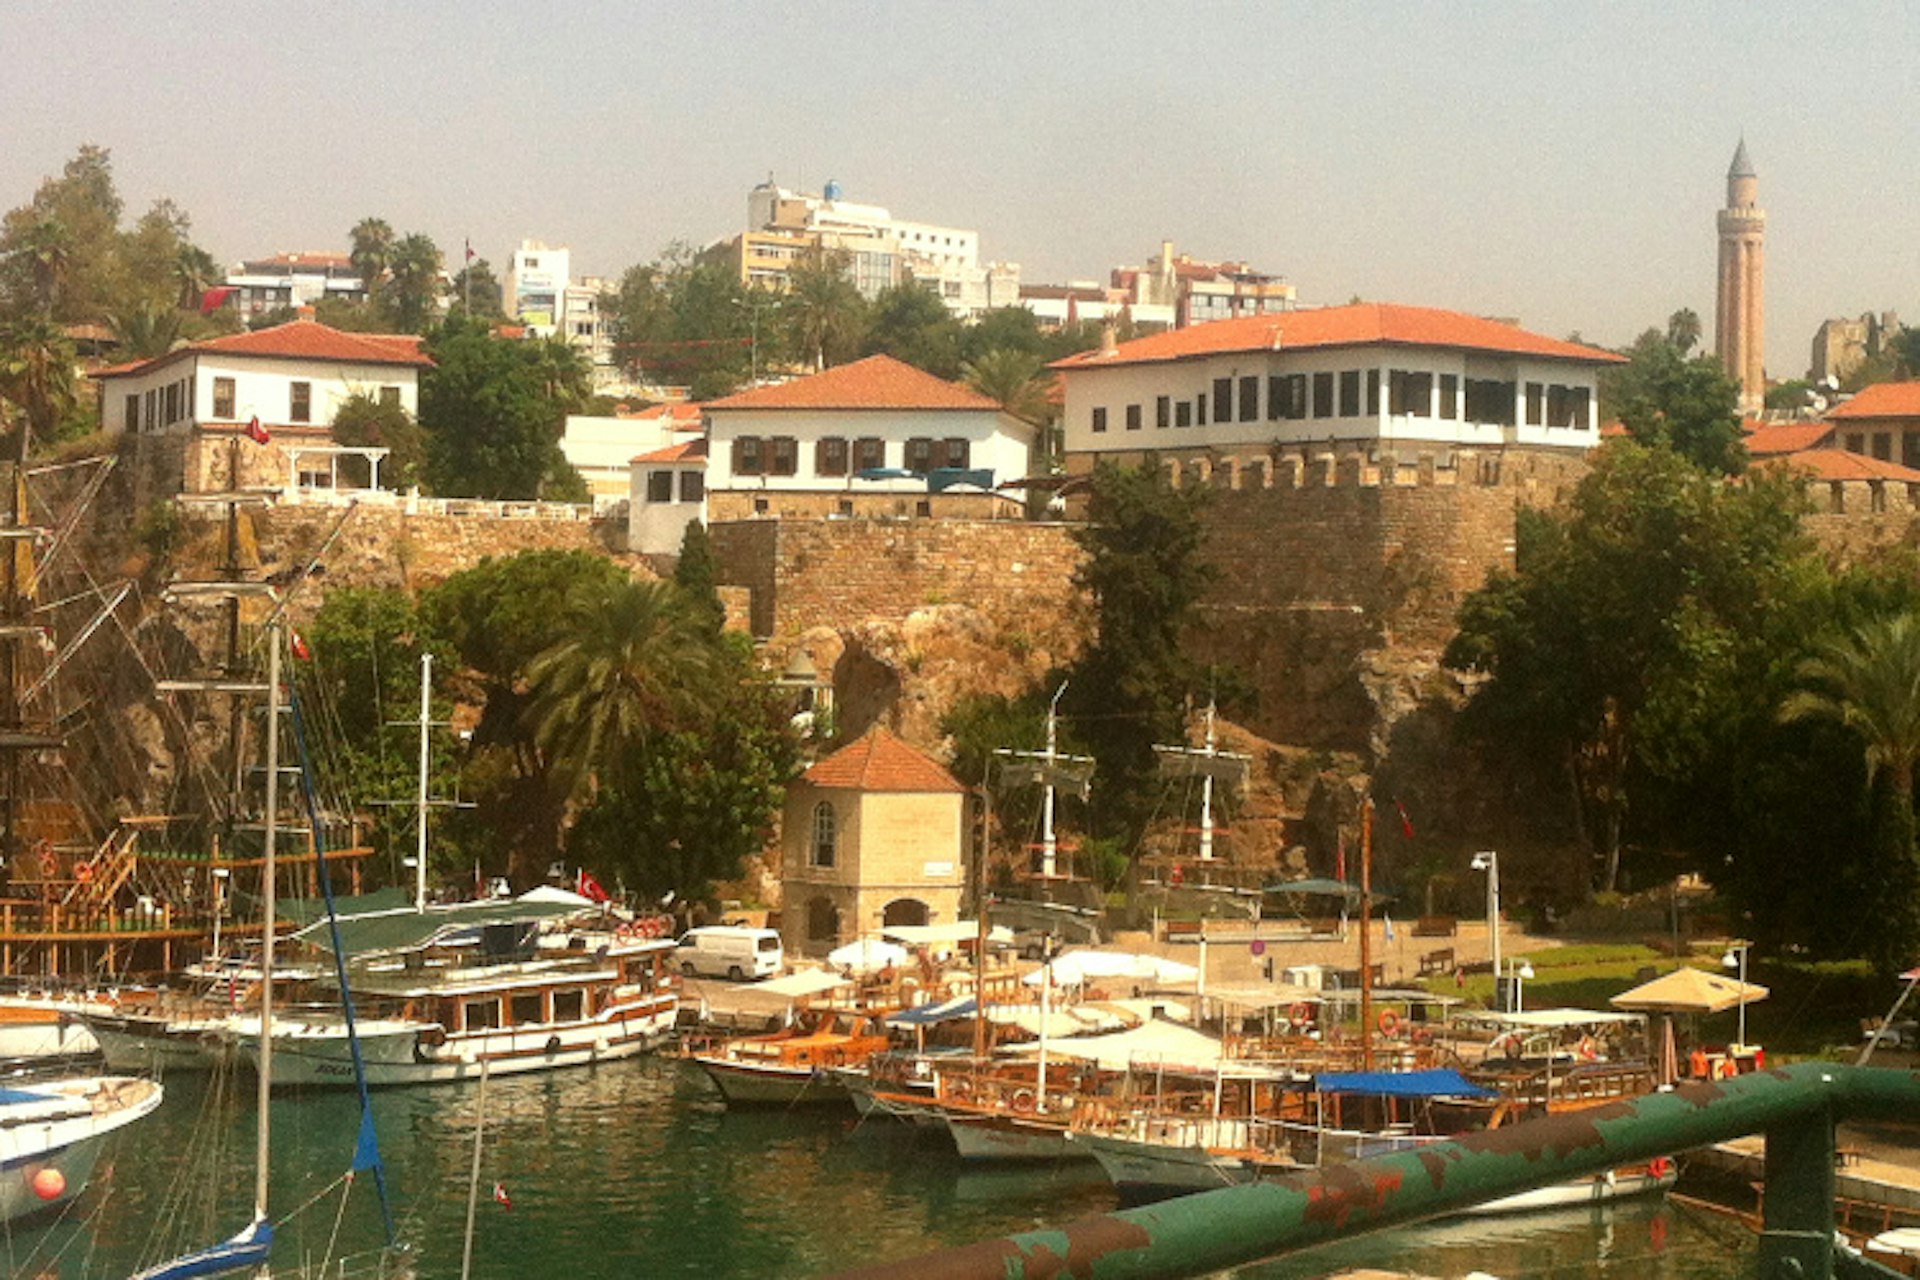 Antalya's Roman harbour. Image by Jo Cooke / Lonely Planet